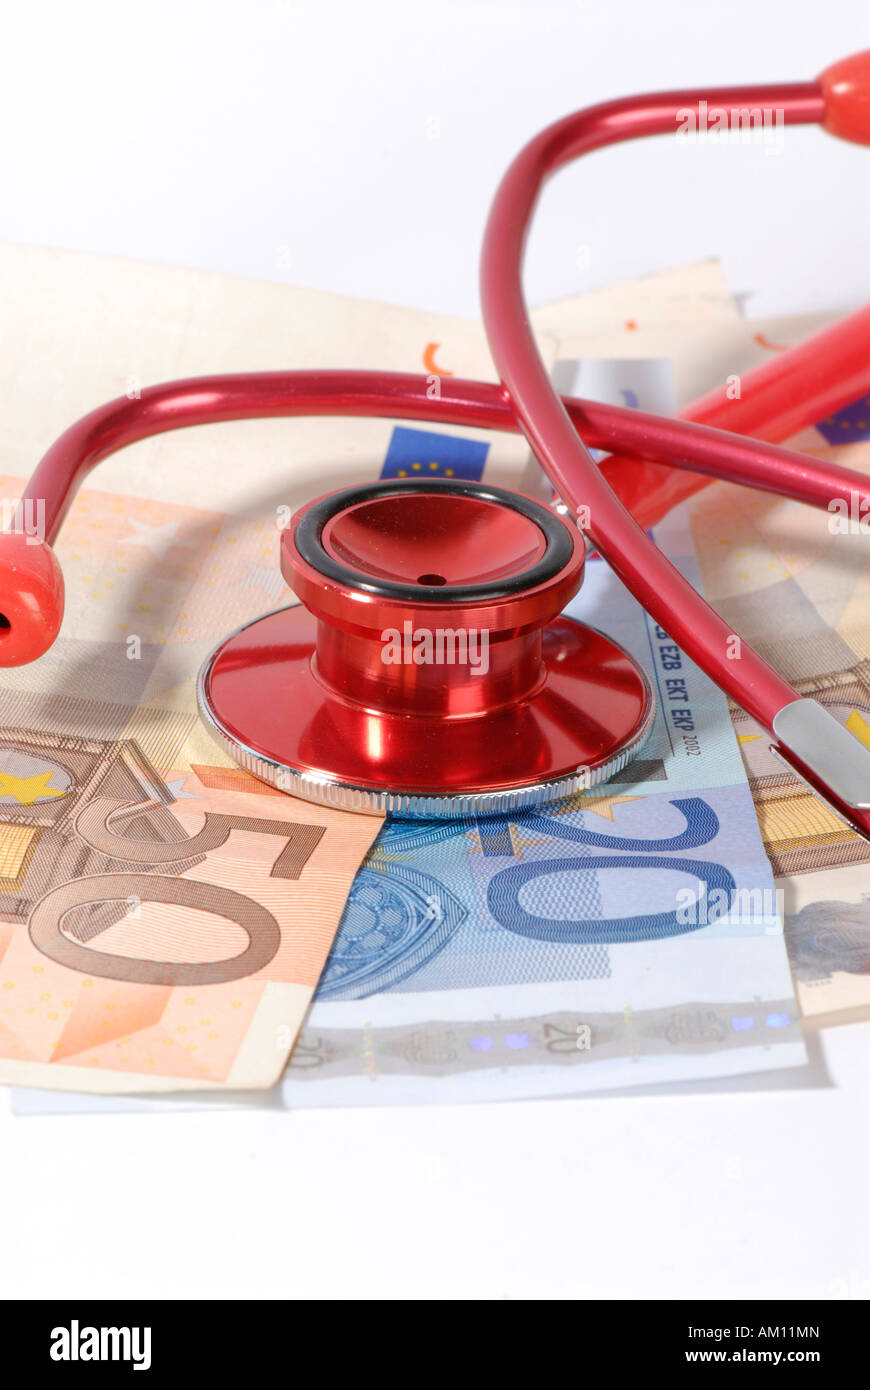 Banknotes and stethoscope Stock Photo